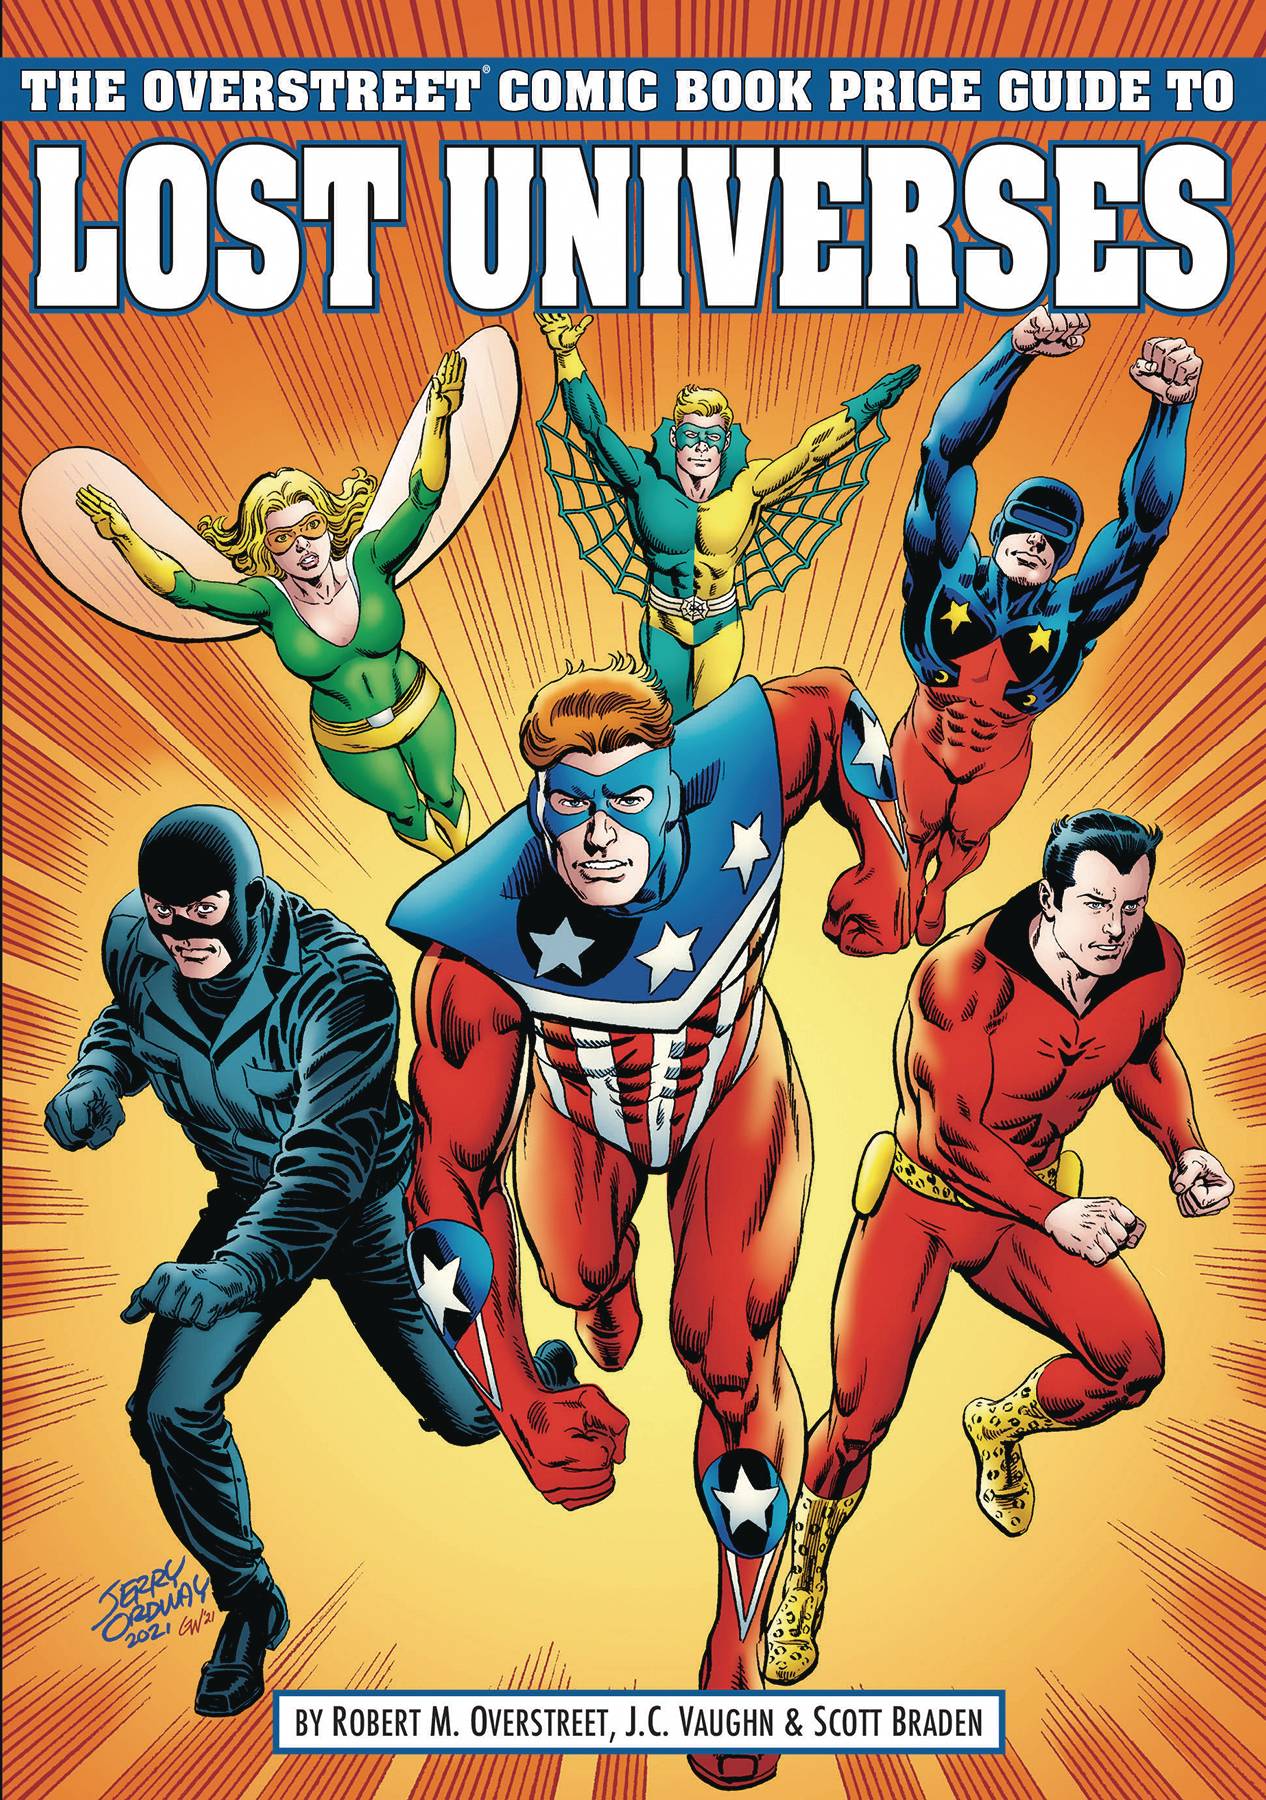 OVERSTREET GUIDE TO LOST UNIVERSES TP CRUSADERS